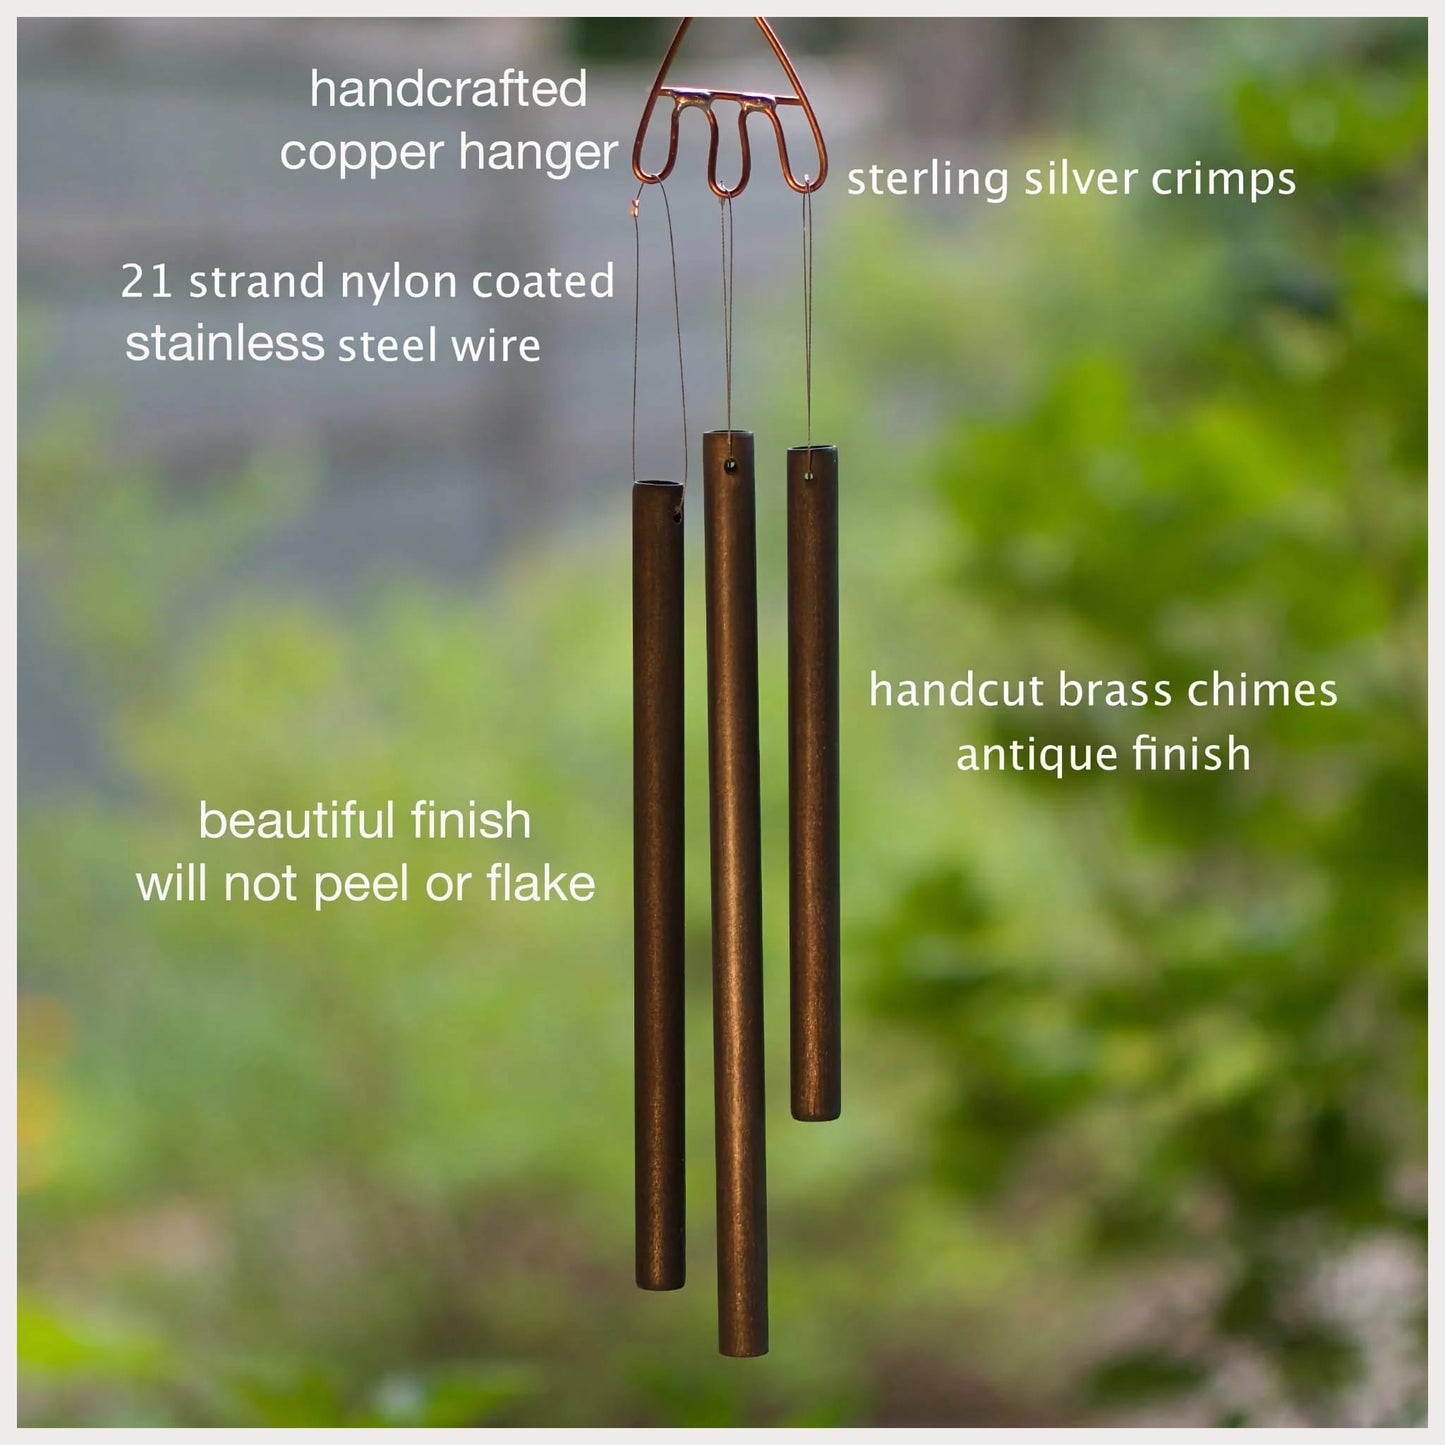 info poster about handmade brass chimes